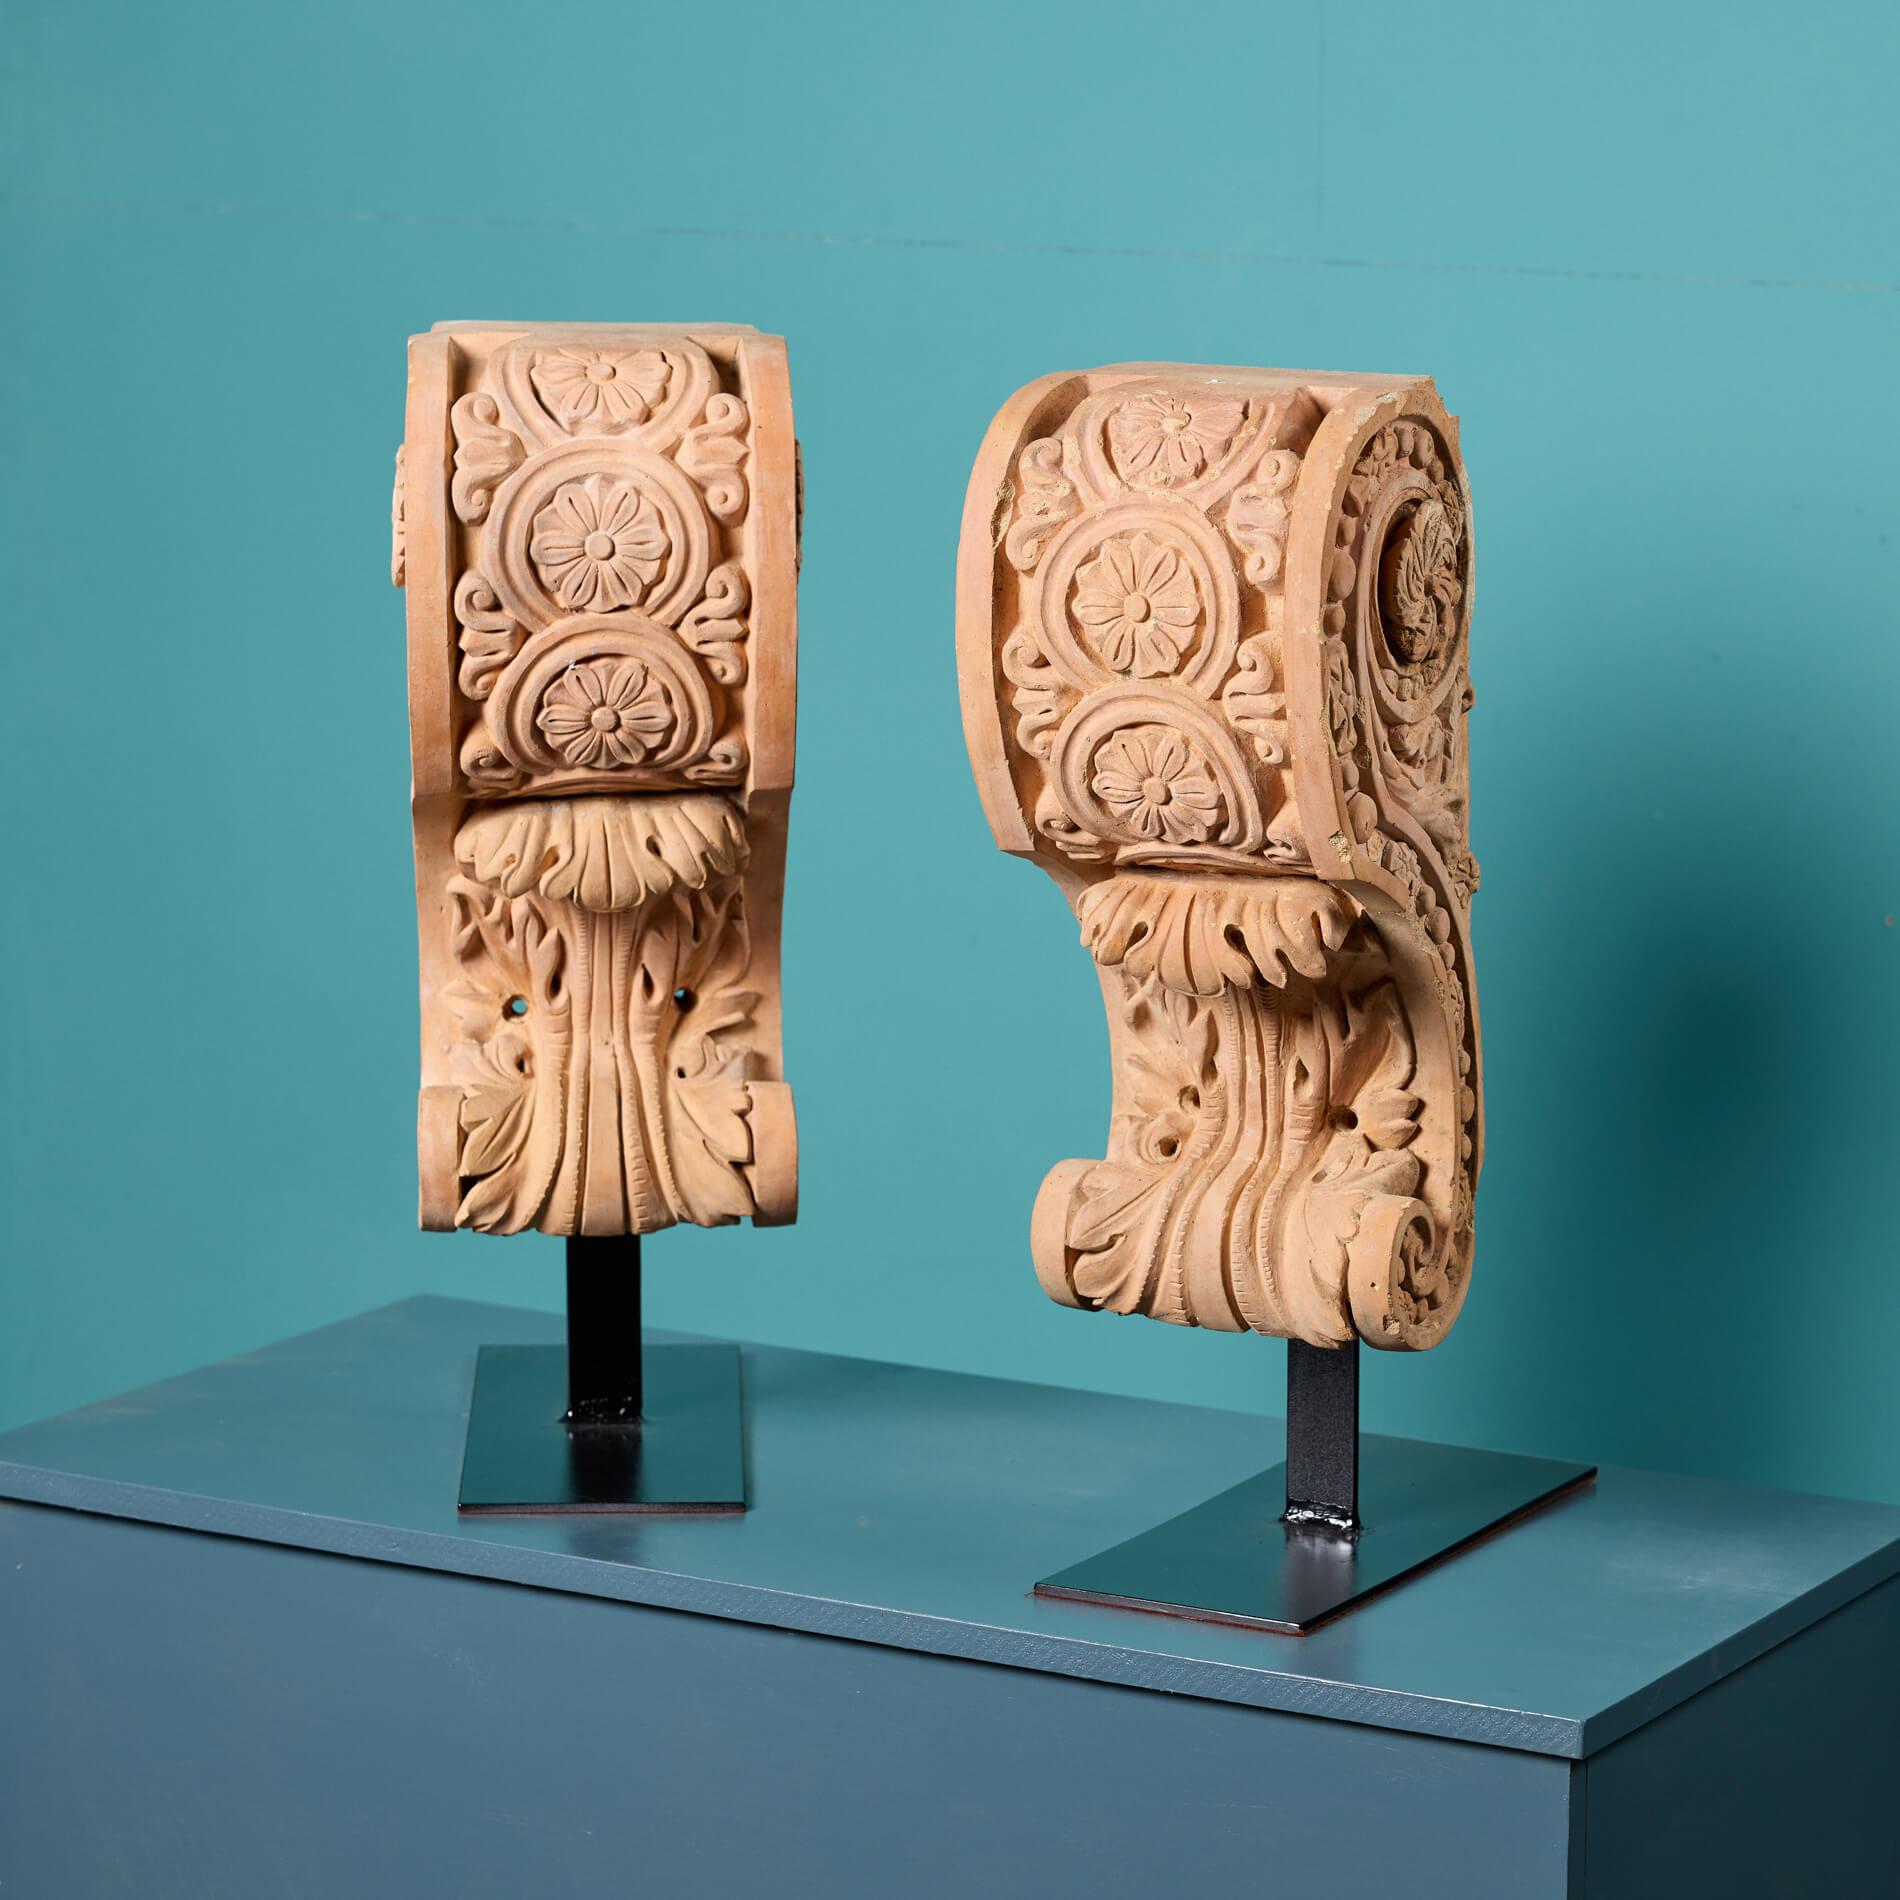 Though corbels are conventionally used as an architectural fixture, this pair of antique corbels are too beautiful to simply sit on a wall or ceiling. Instead, they have been repurposed as sculpture, brought to life on bespoke steel stands to allow